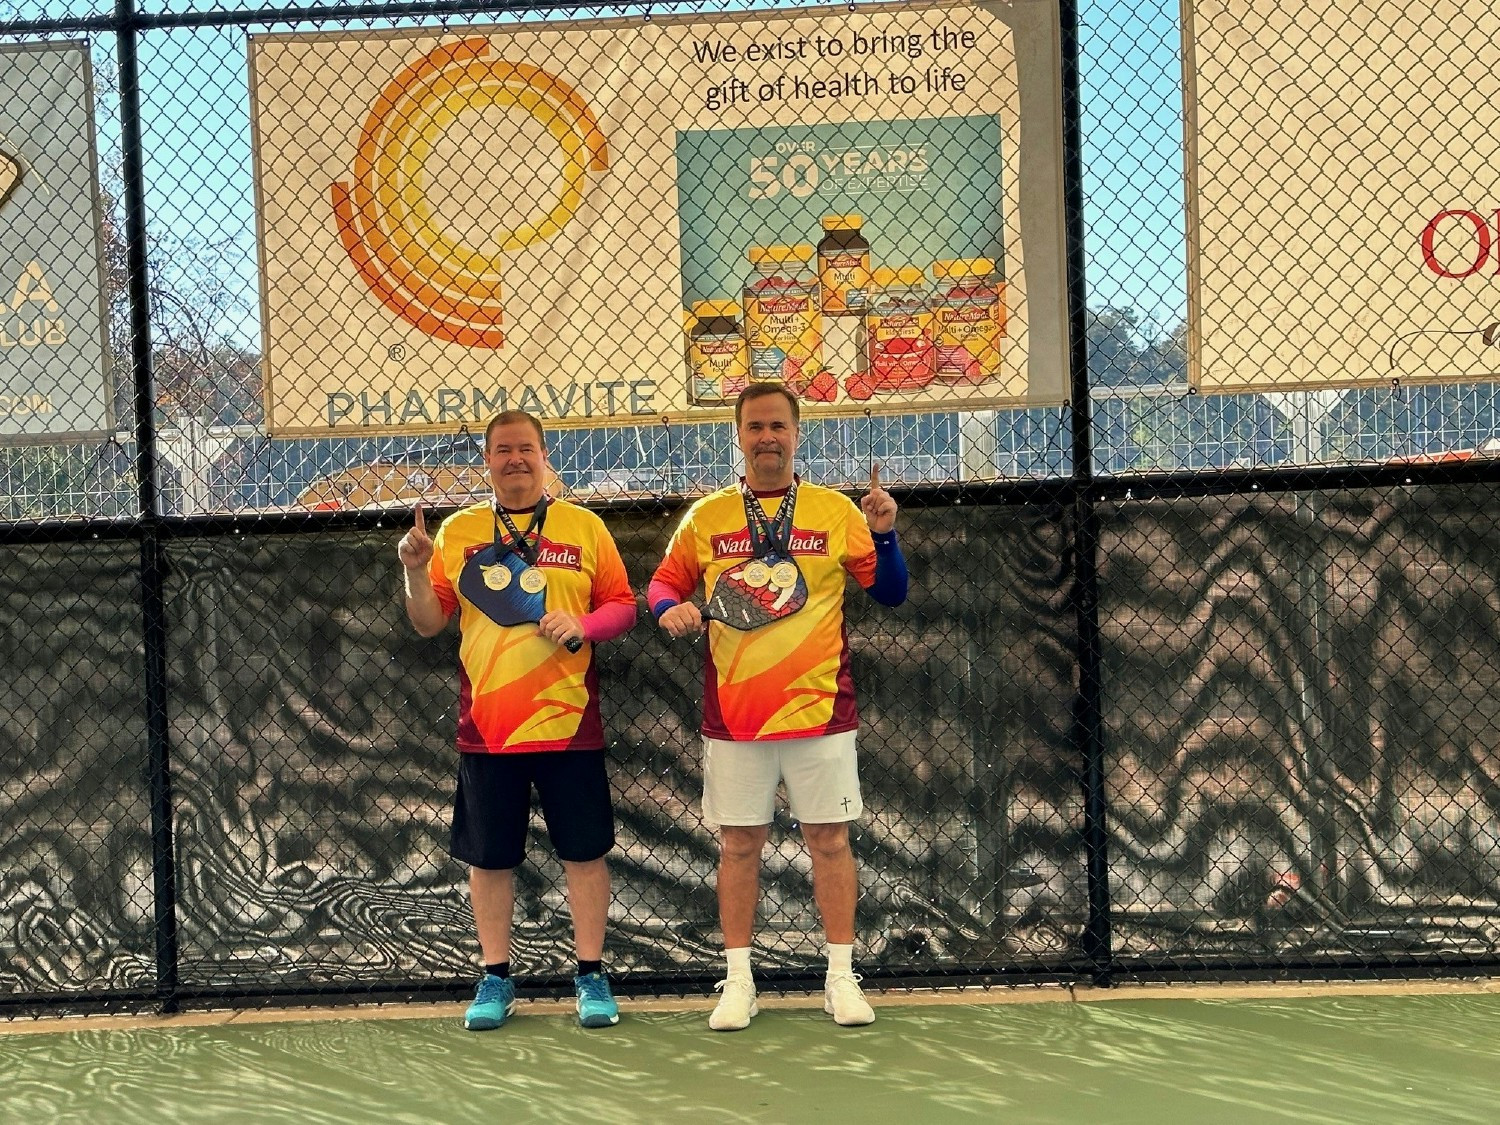 Employees playing in a pickleball tournament at a local sports complex where Pharmavite is a corporate sponsor.